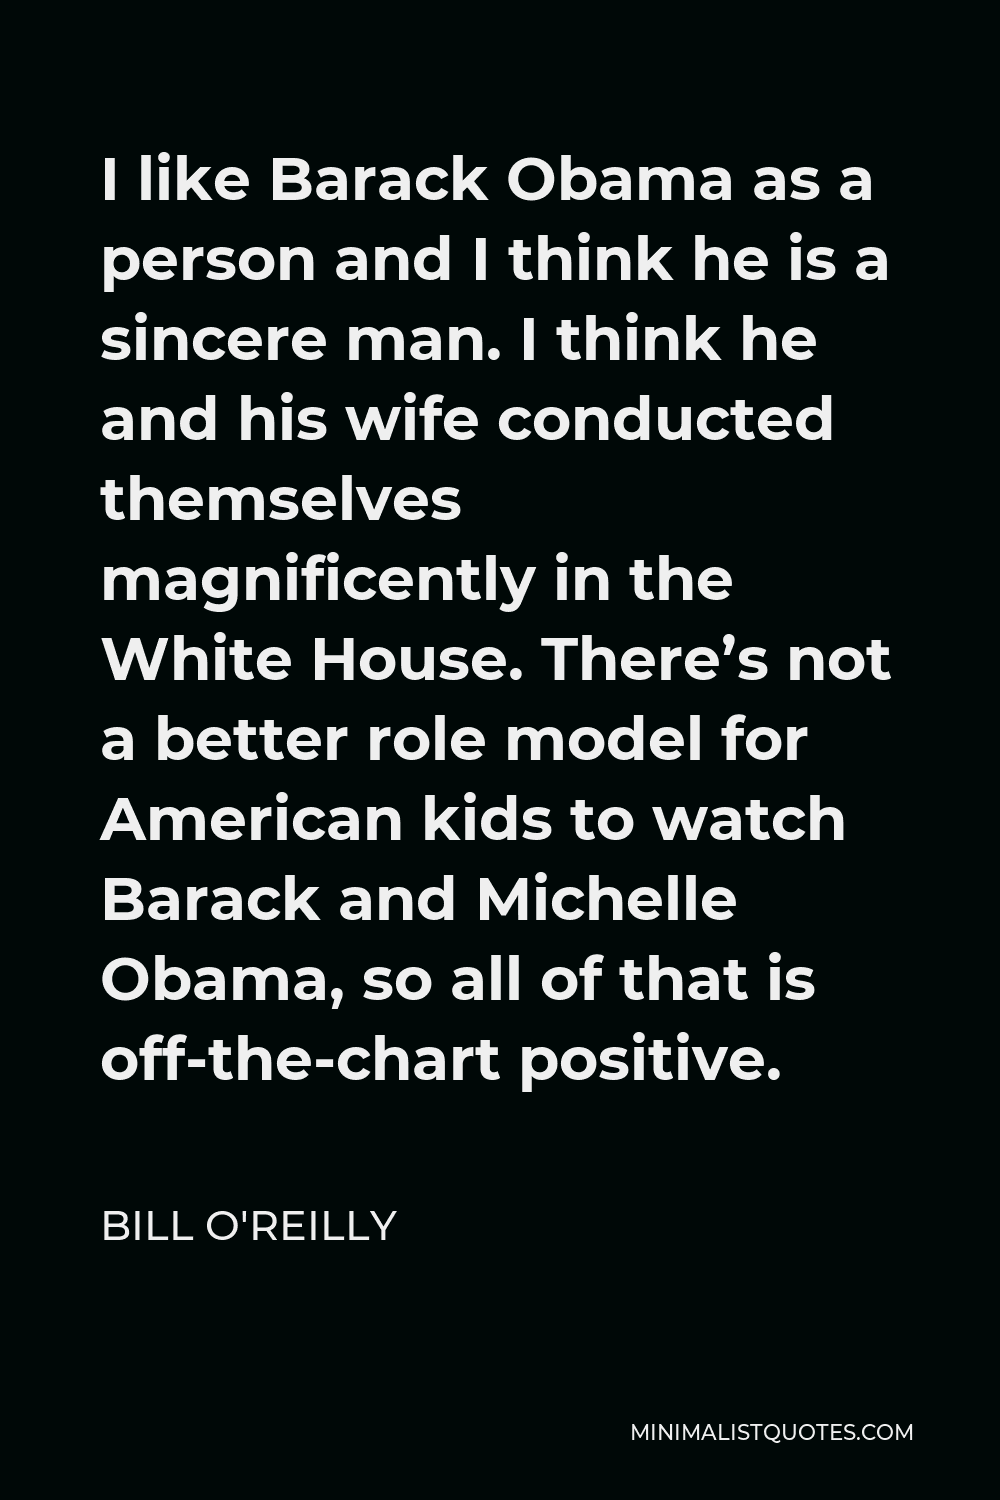 Bill O'Reilly Quote - I like Barack Obama as a person and I think he is a sincere man. I think he and his wife conducted themselves magnificently in the White House. There’s not a better role model for American kids to watch Barack and Michelle Obama, so all of that is off-the-chart positive.